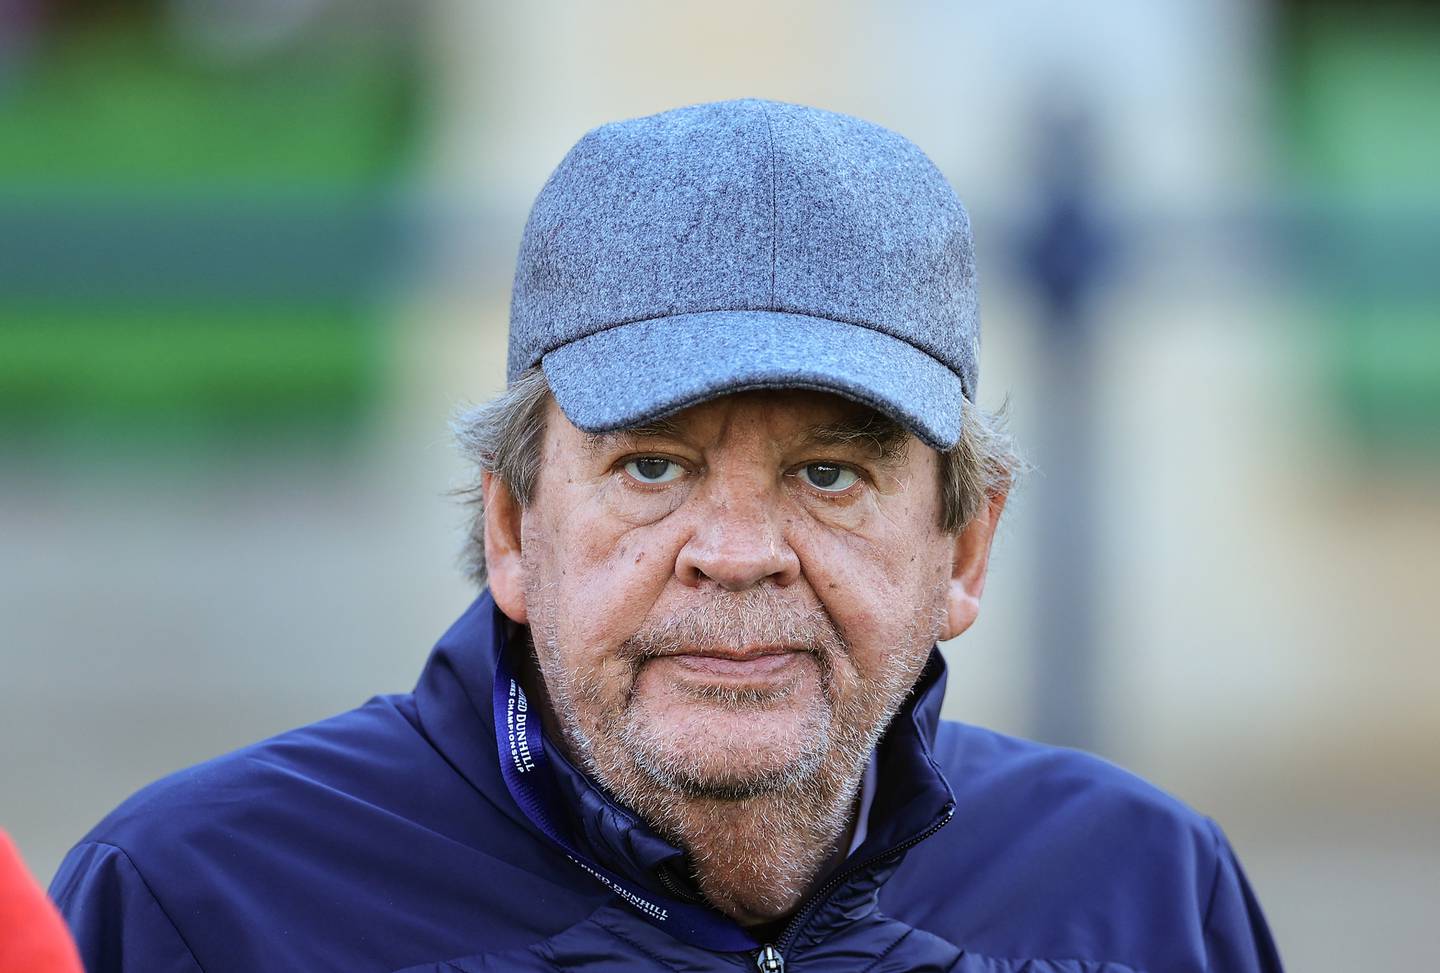 Johann Rupert, Chairman and CEO of Richemont, seen golfing in St Andrews, Scotland in October 2021. Getty Images.